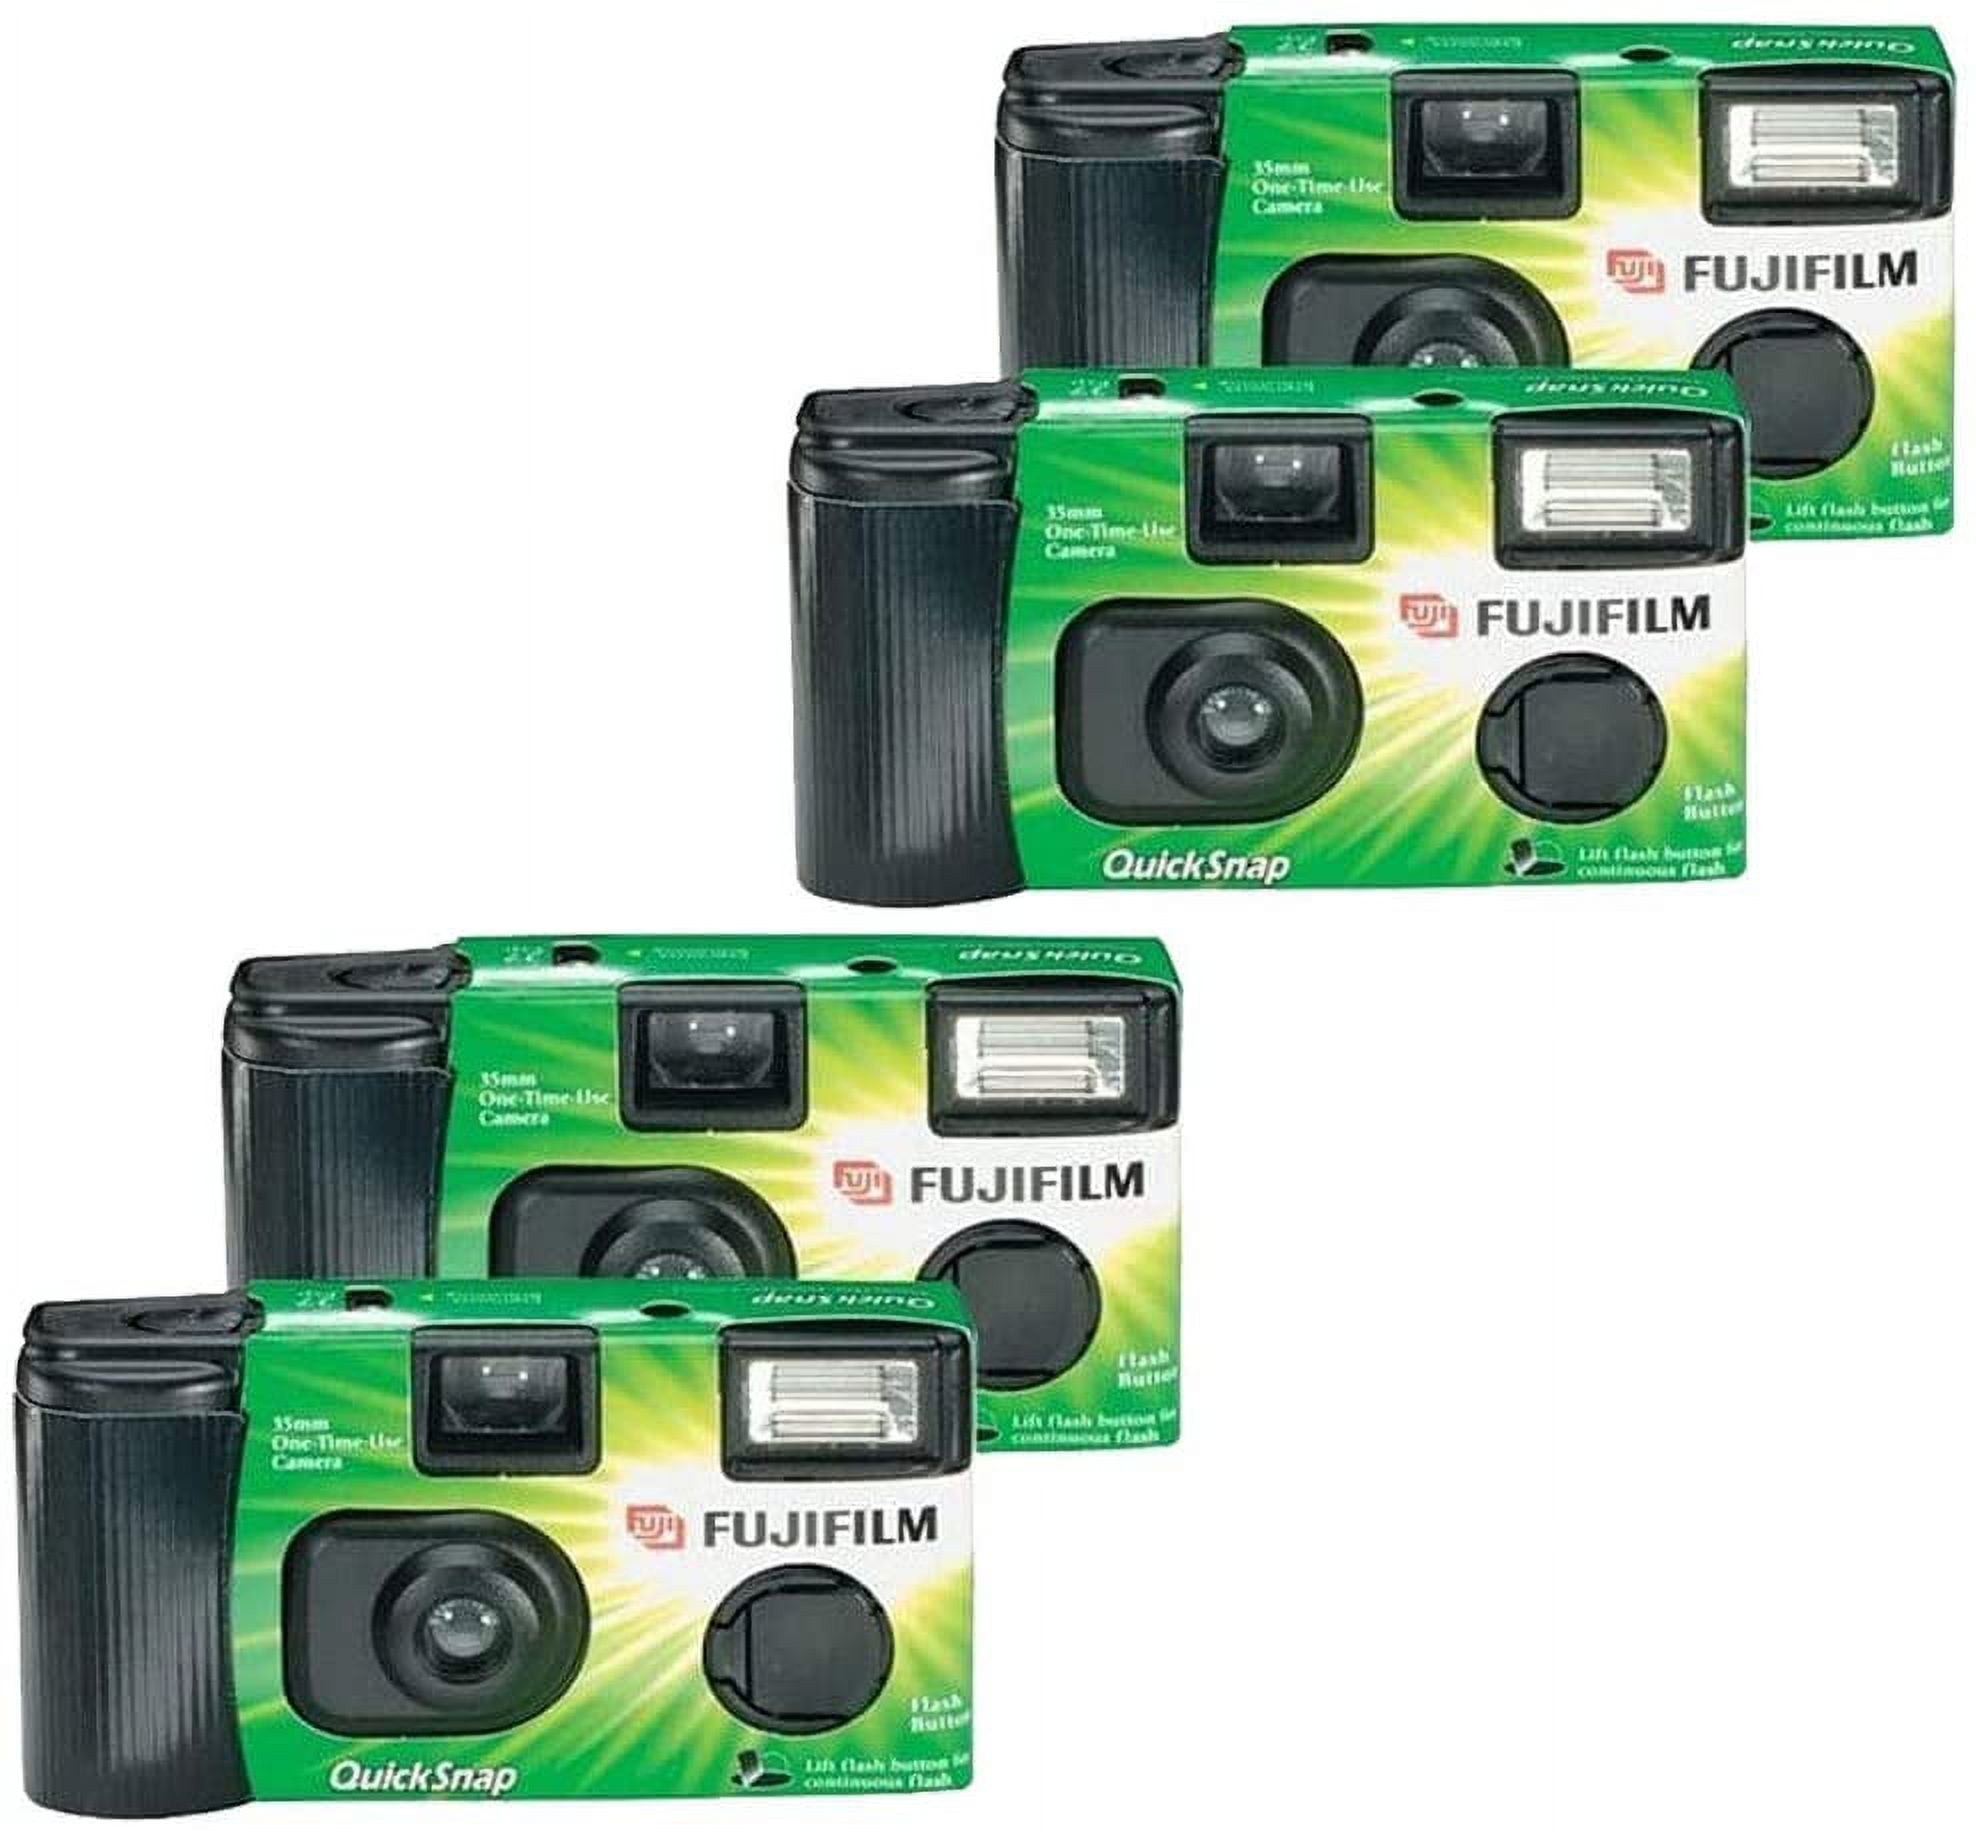 Fujifilm Quick Snap disposable camera reviewed with photo samples - The  Darkroom Photo Lab